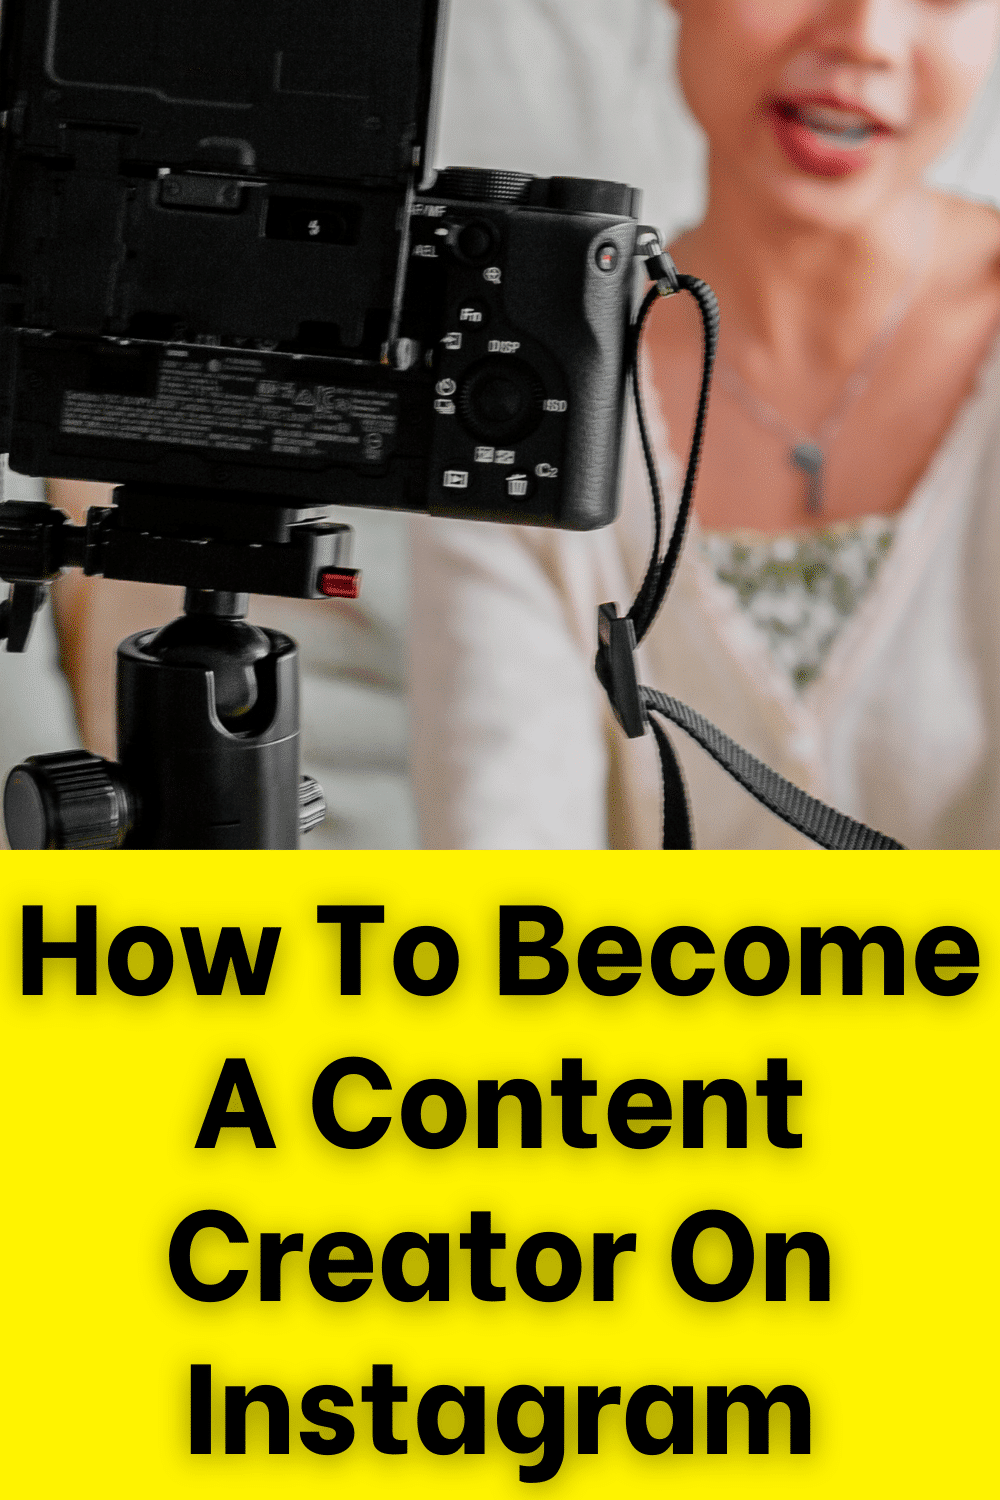 How To Become A Content Creator On Instagram